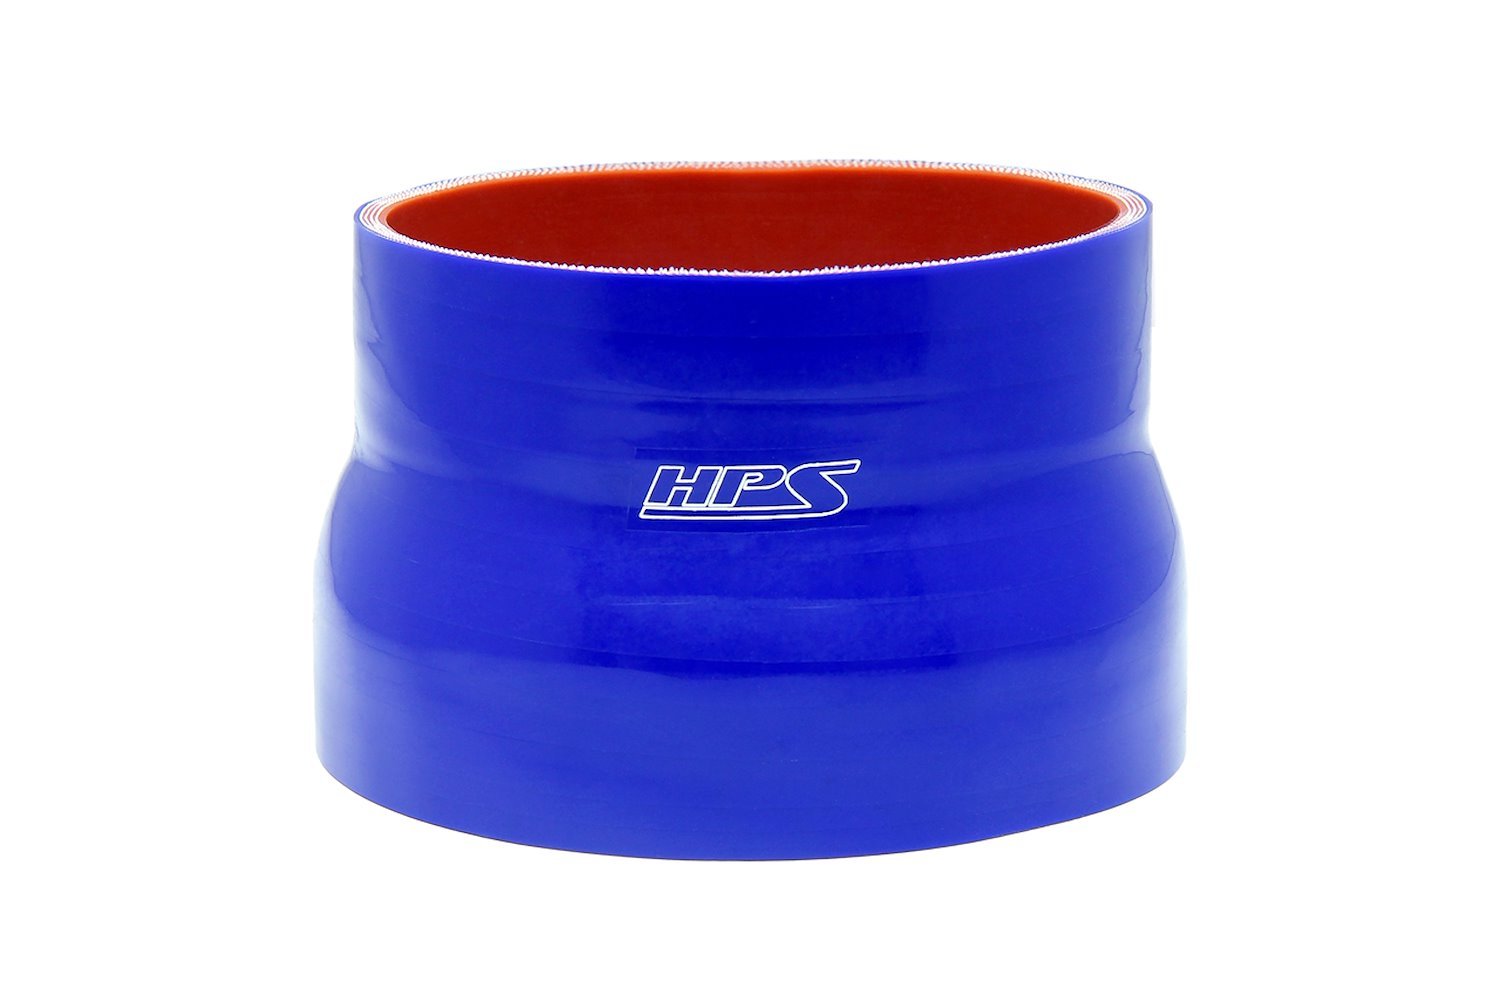 HTSR-500-600-L4-BLUE Silicone Reducer Hose, High-Temp 4-Ply Reinforced, 5 in. - 6 in. ID, 4 in. Long, Blue